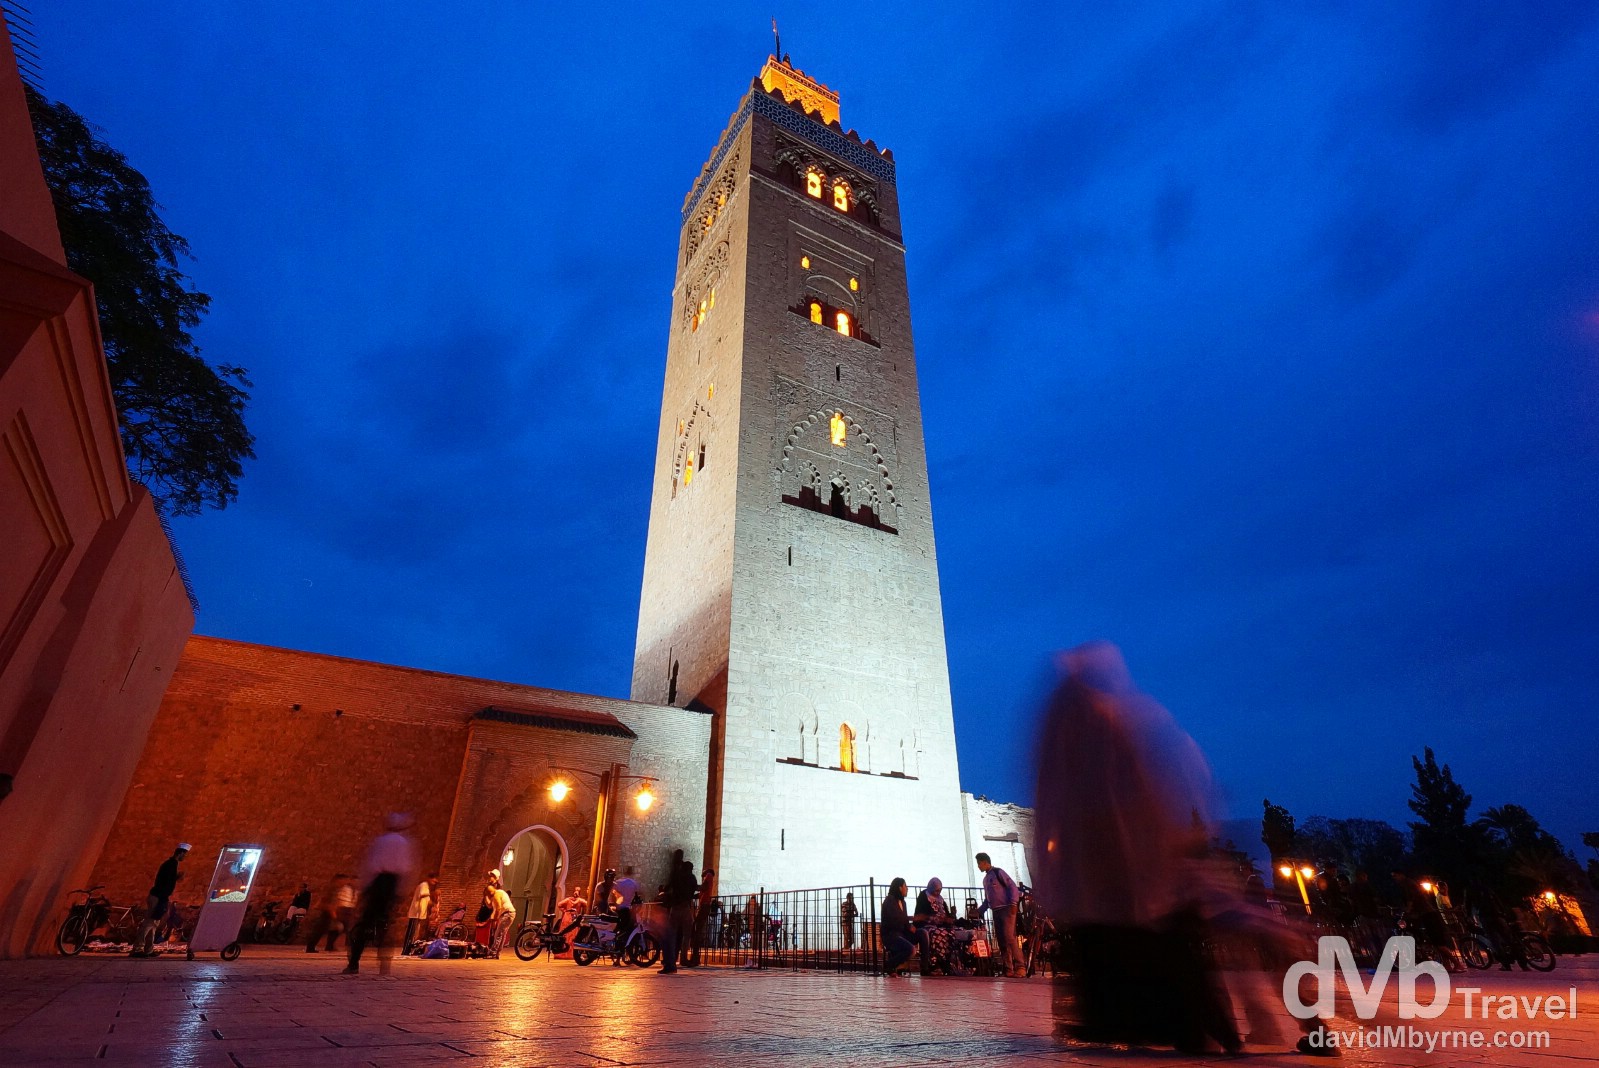 Outside the Koutoubia Mosque shortly after dusk in Marrakesh, Morocco. May 6th, 2014.